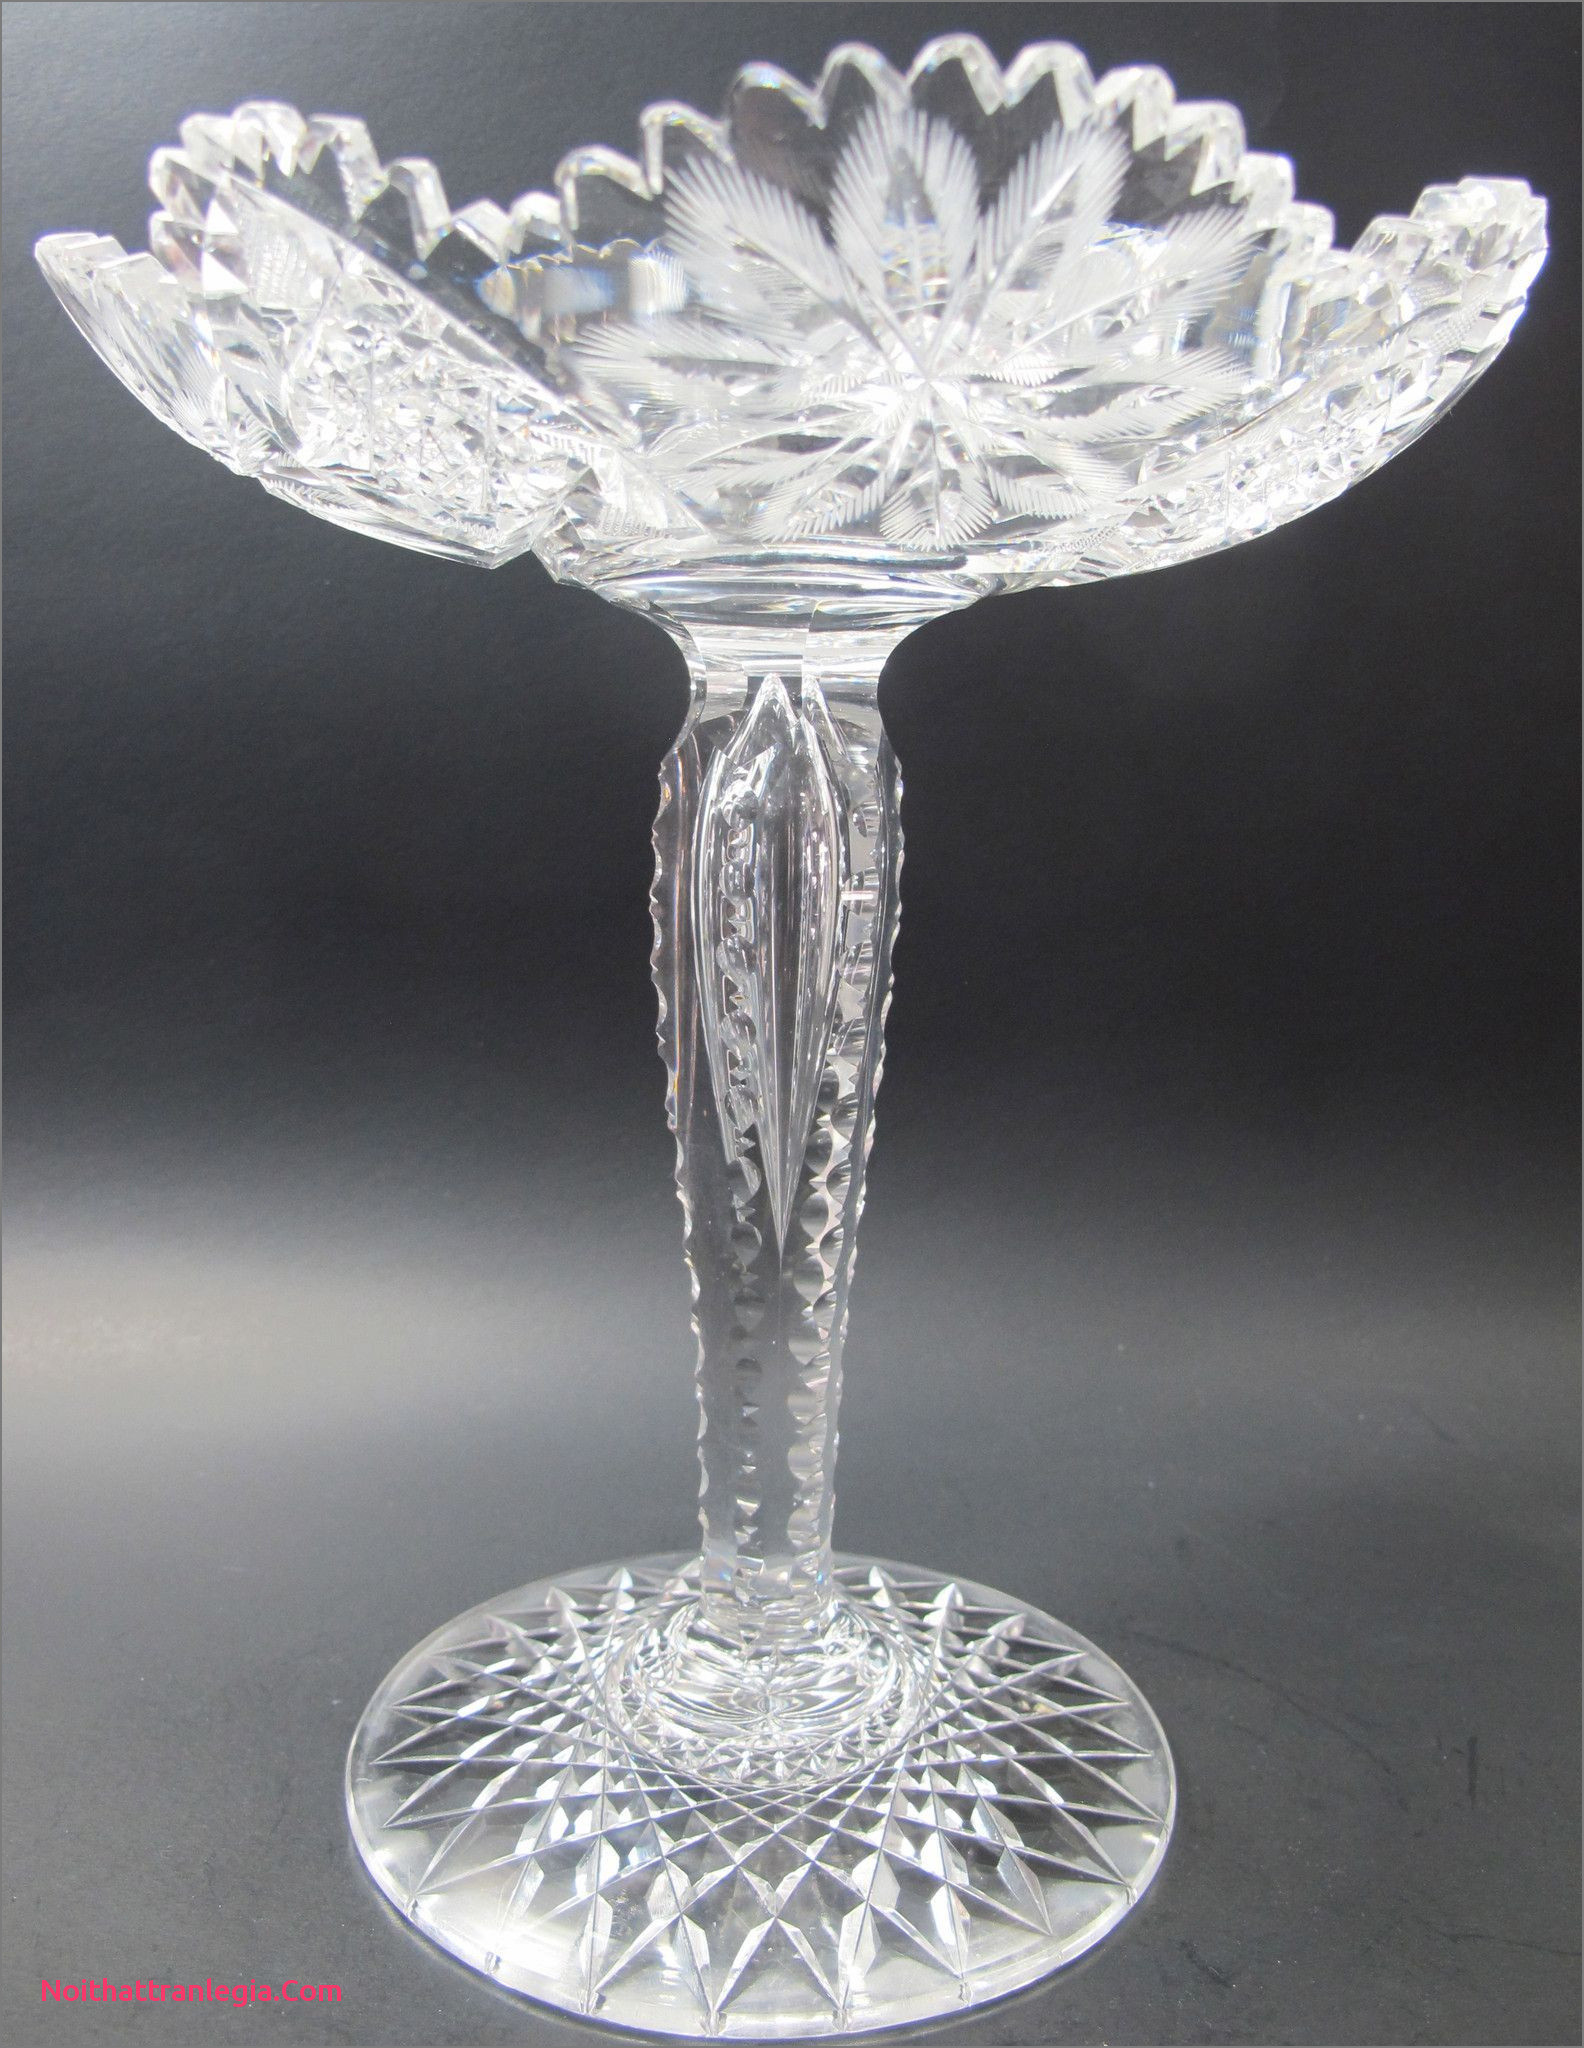 14 Cute Vintage Rose Bowl Vase 2024 free download vintage rose bowl vase of 20 cut glass antique vase noithattranlegia vases design with regard to fering this abp antique cut glass pote from the american brilliant period 1886 1916 9 5